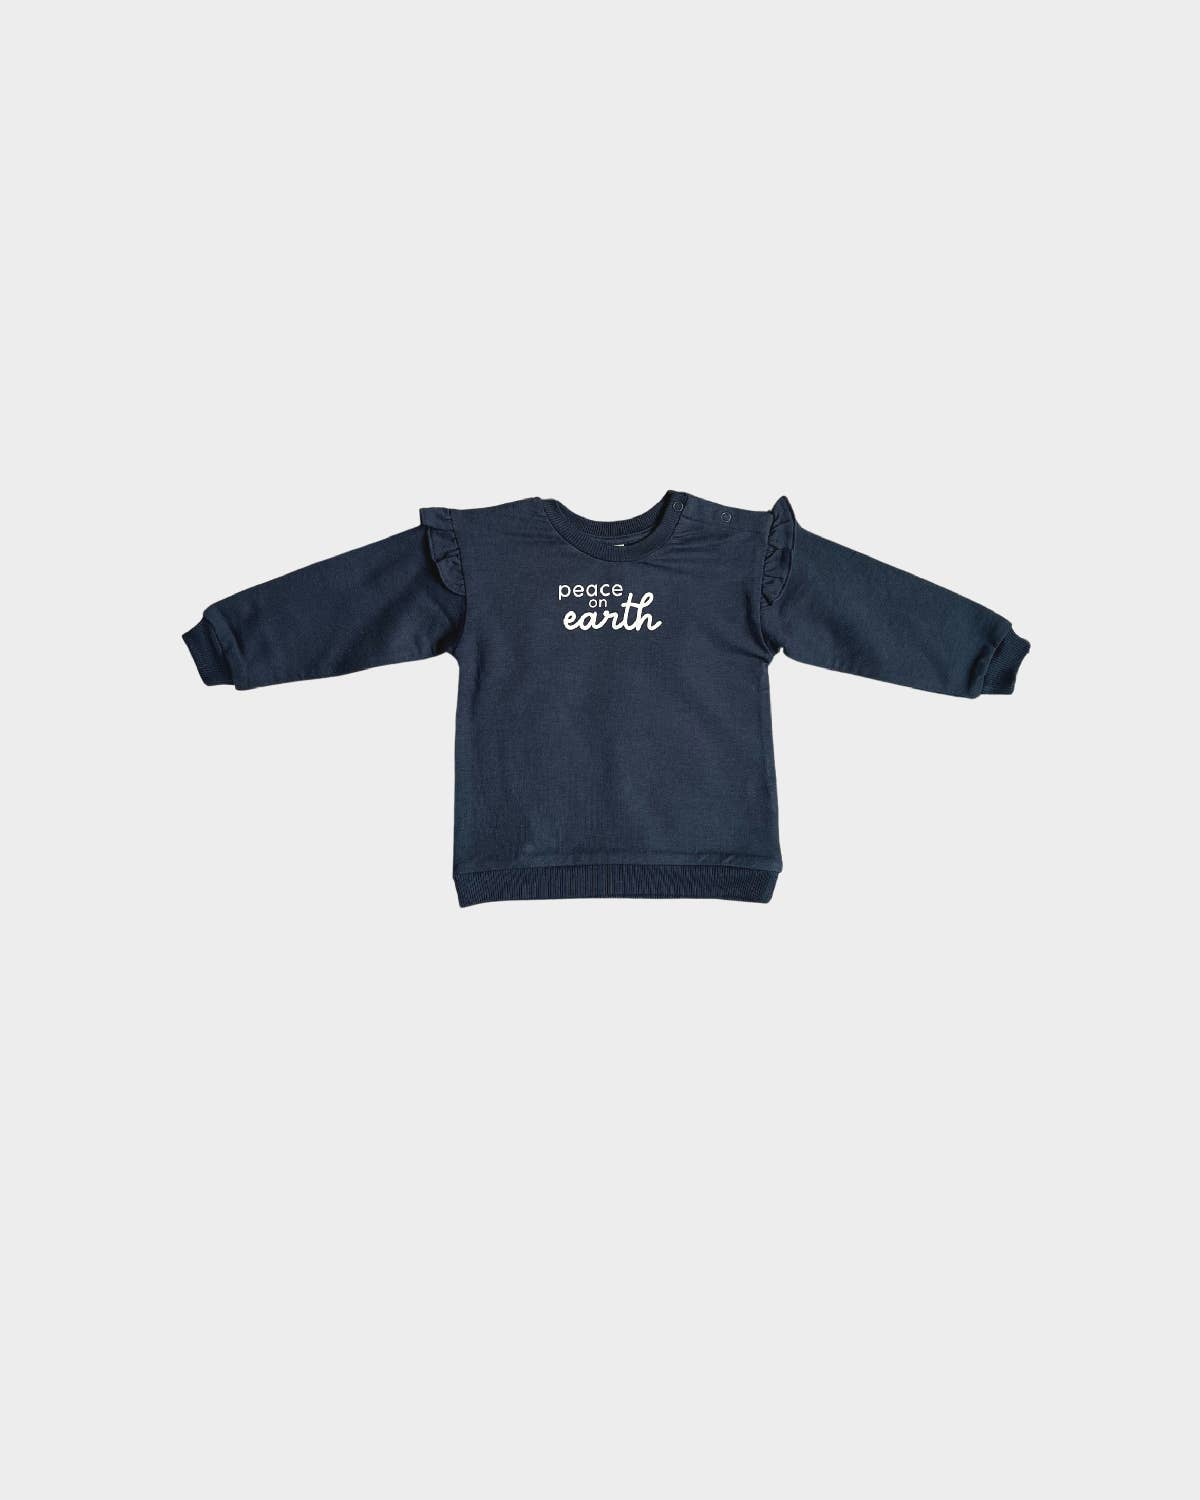 babysprouts clothing company - F23 D2: Ruffle Sweatshirt in Peace on Earth